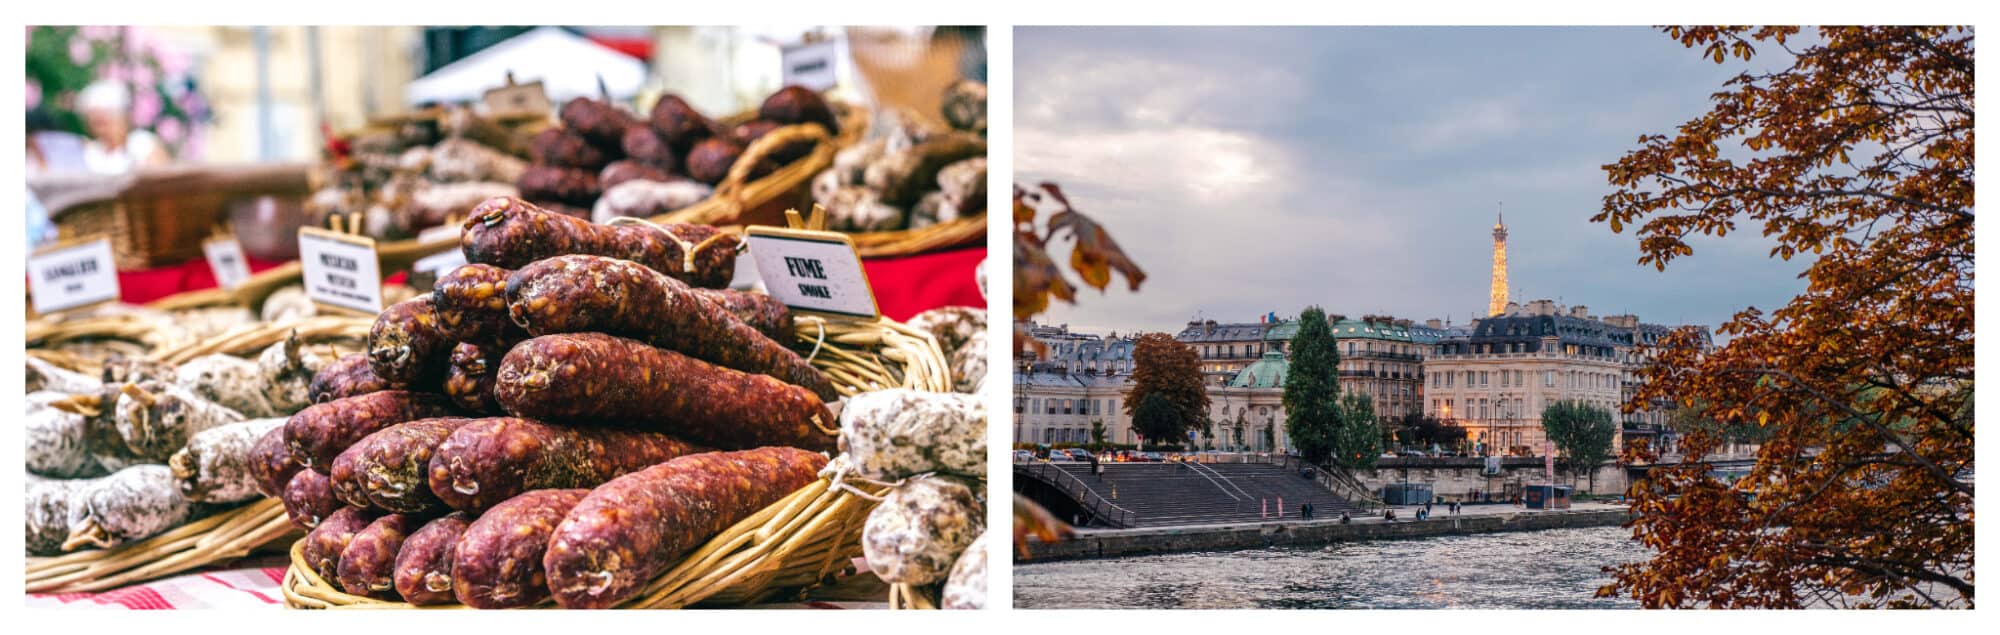 left: a display of charcuterie at a Paris market; right: the Seine at sunset with the Eiffel Tower lit up in the background